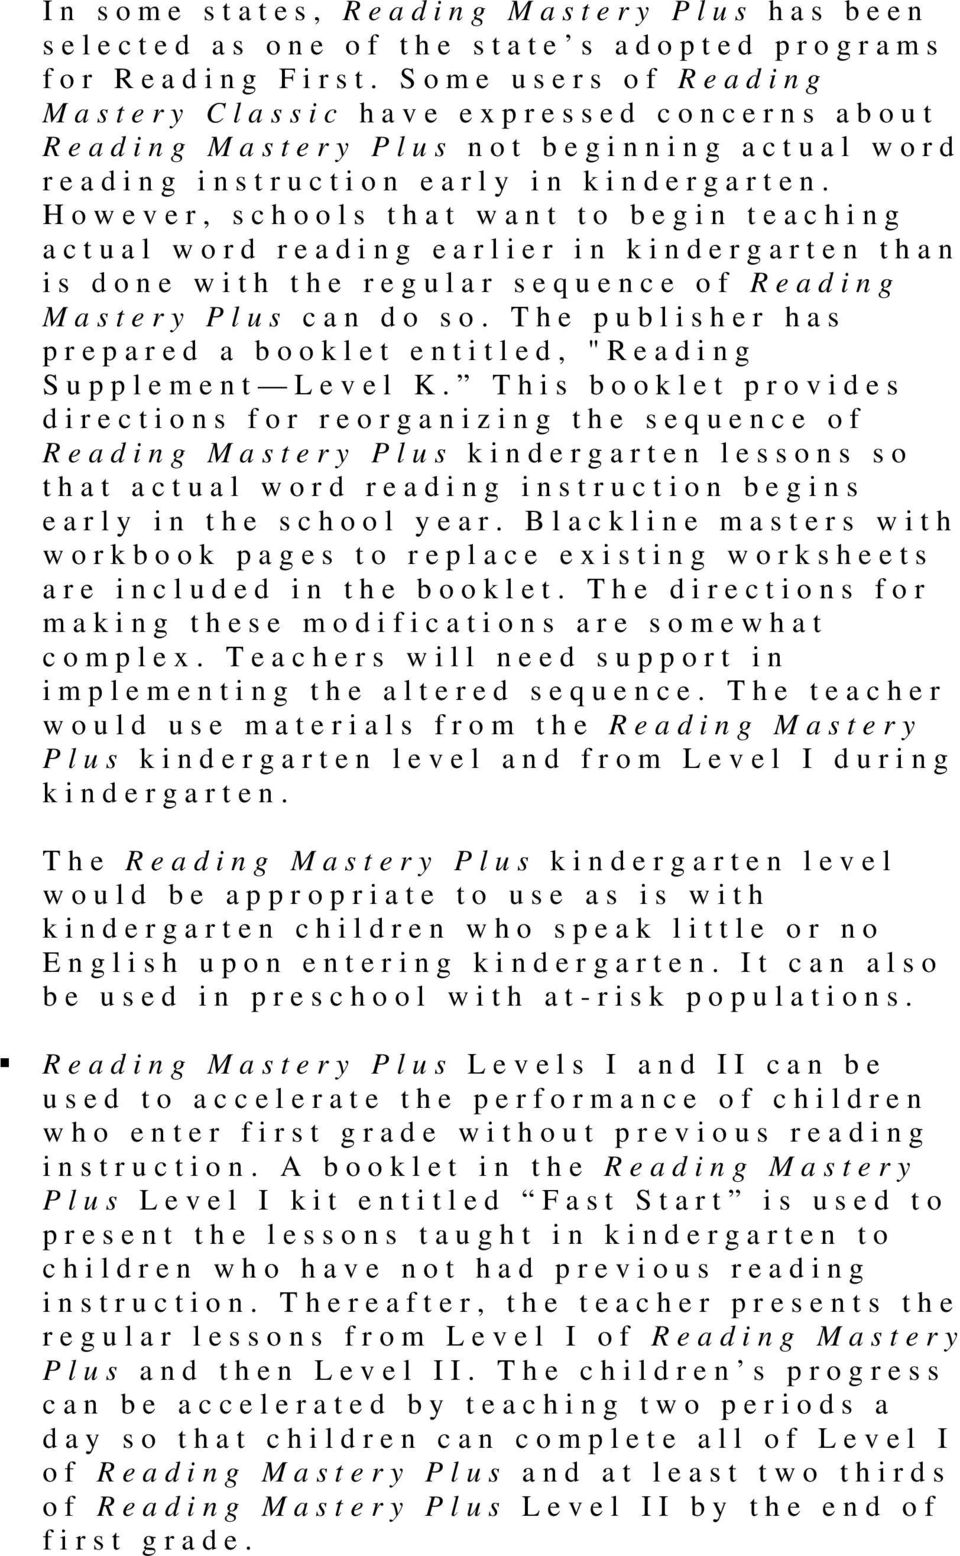 However, schools that want to begin teaching actual word reading earlier in kindergarten than is done with the regular sequence of Reading Mastery Plus can do so.